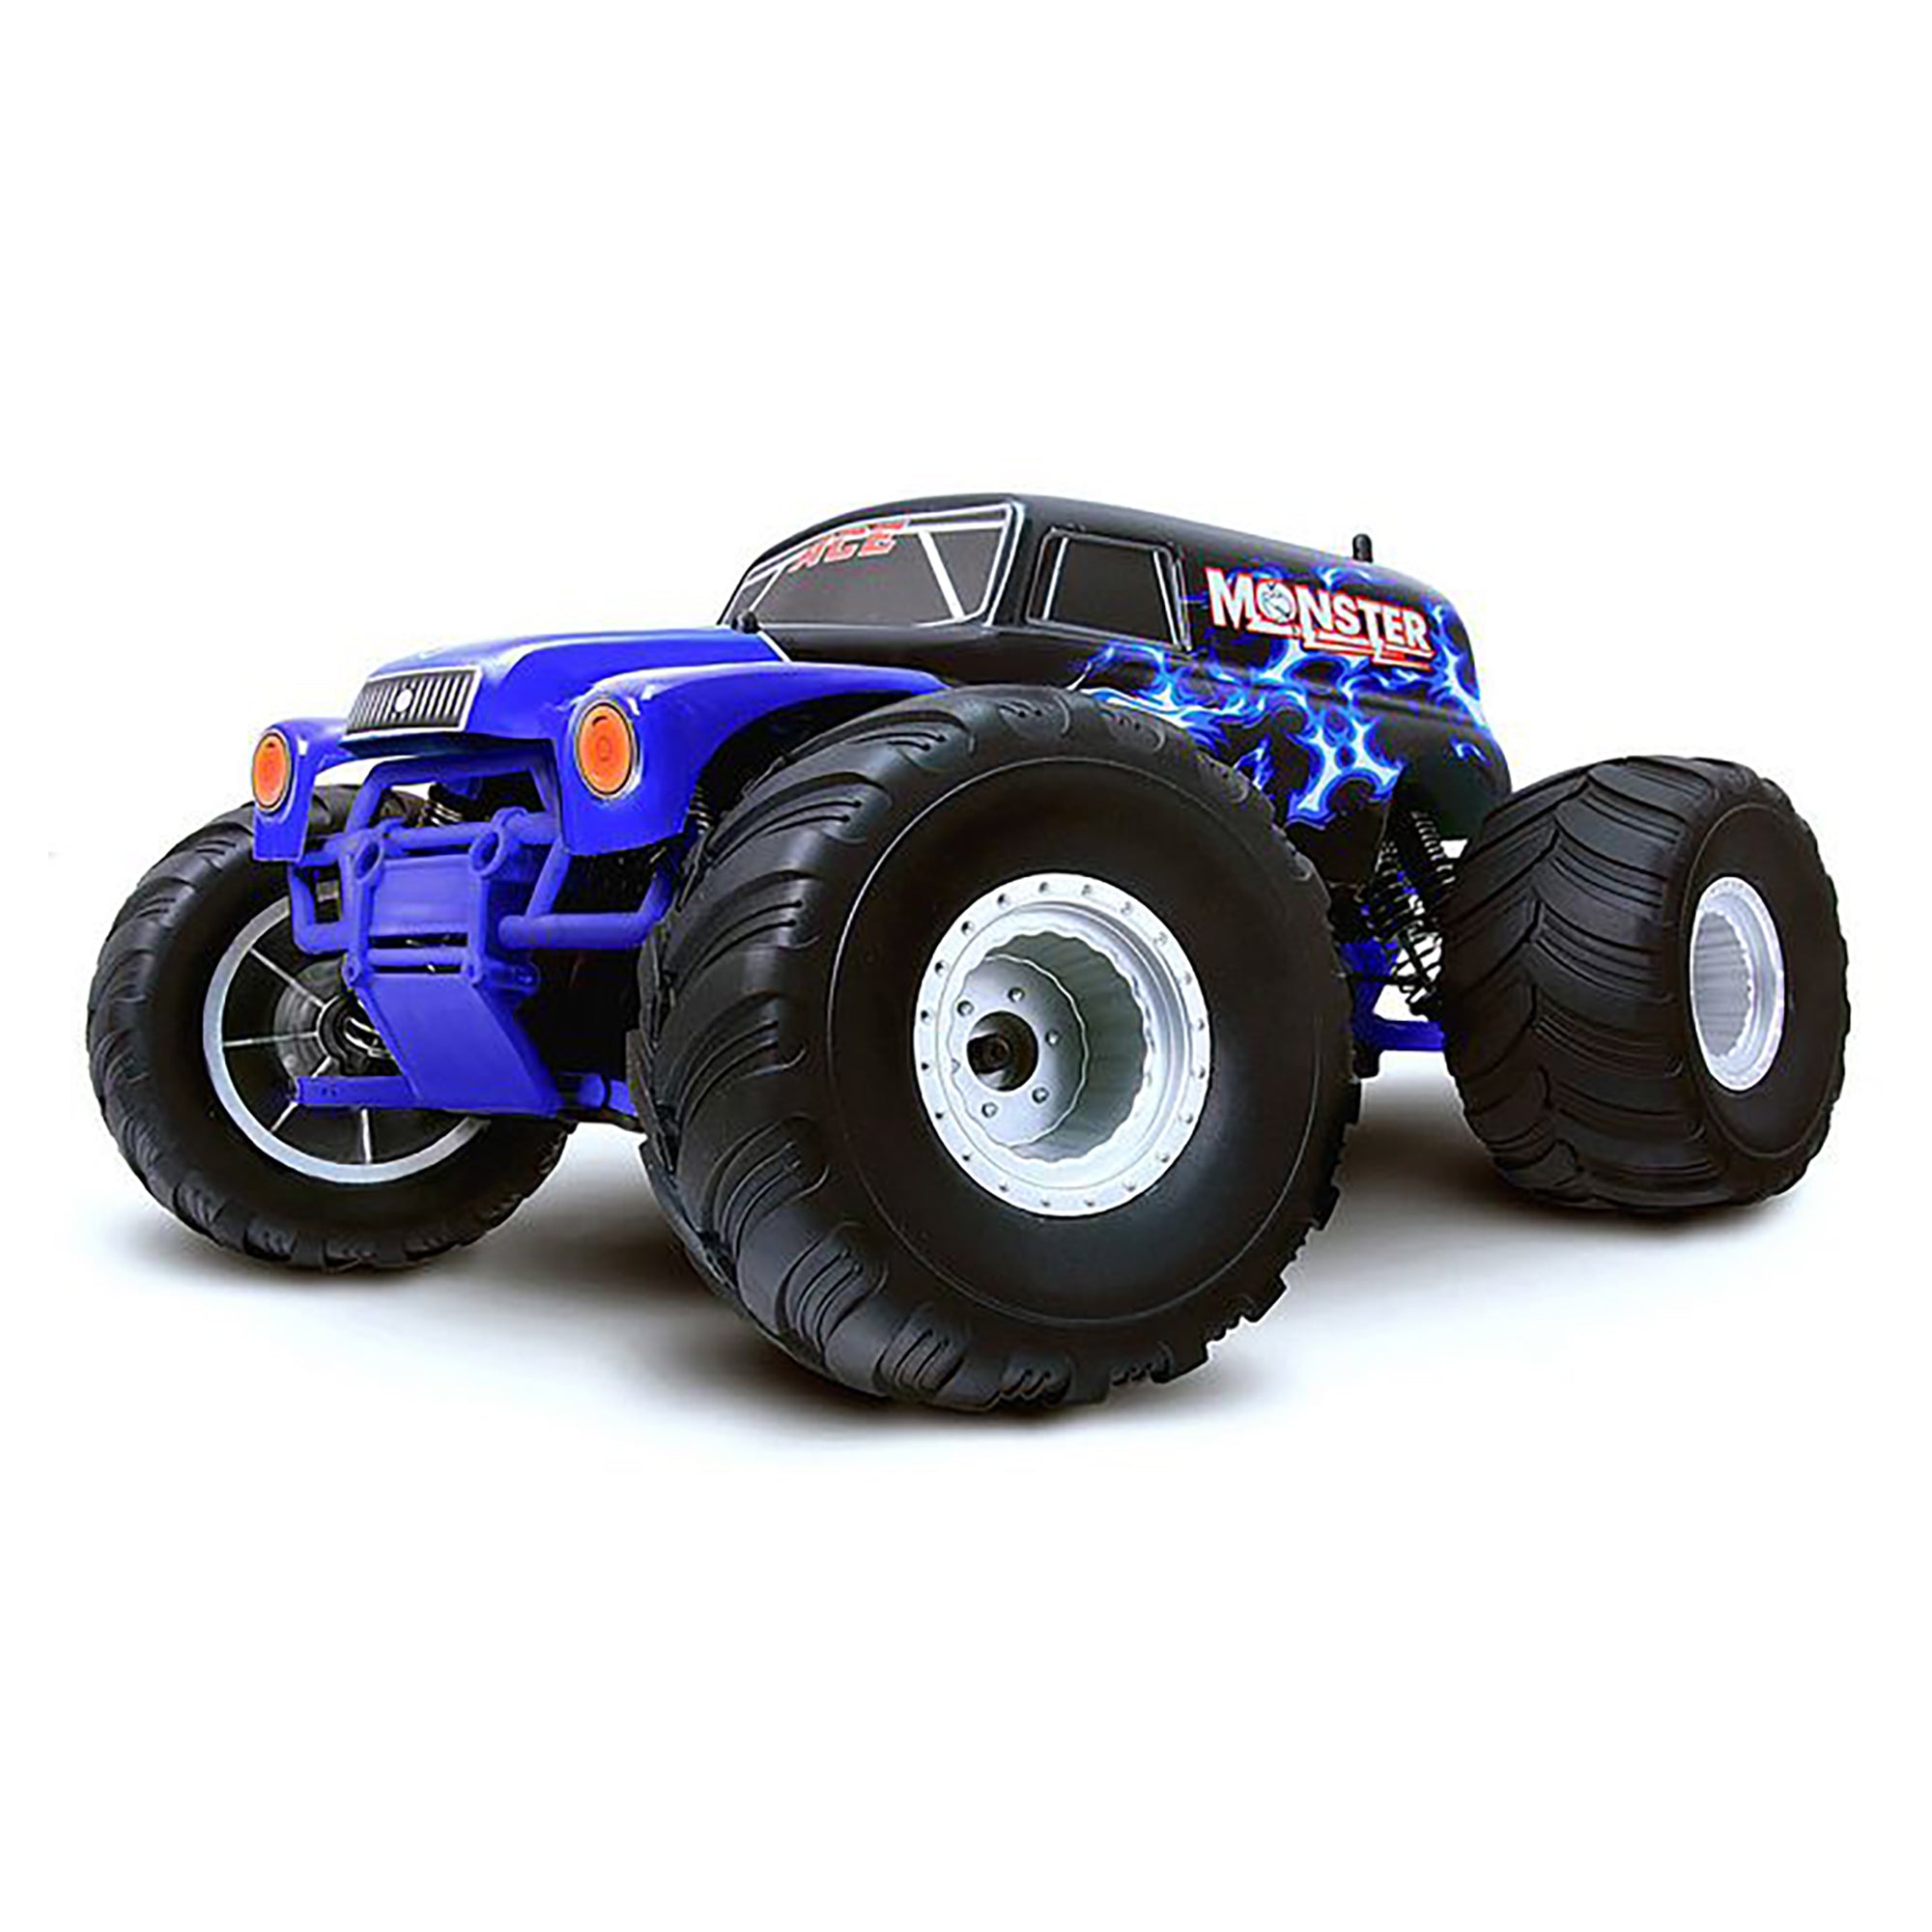 HSP Racing ACE Monster Truck Special Edition Blue 2.4GHz Brushless 4WD Off Road RTR RC Truck